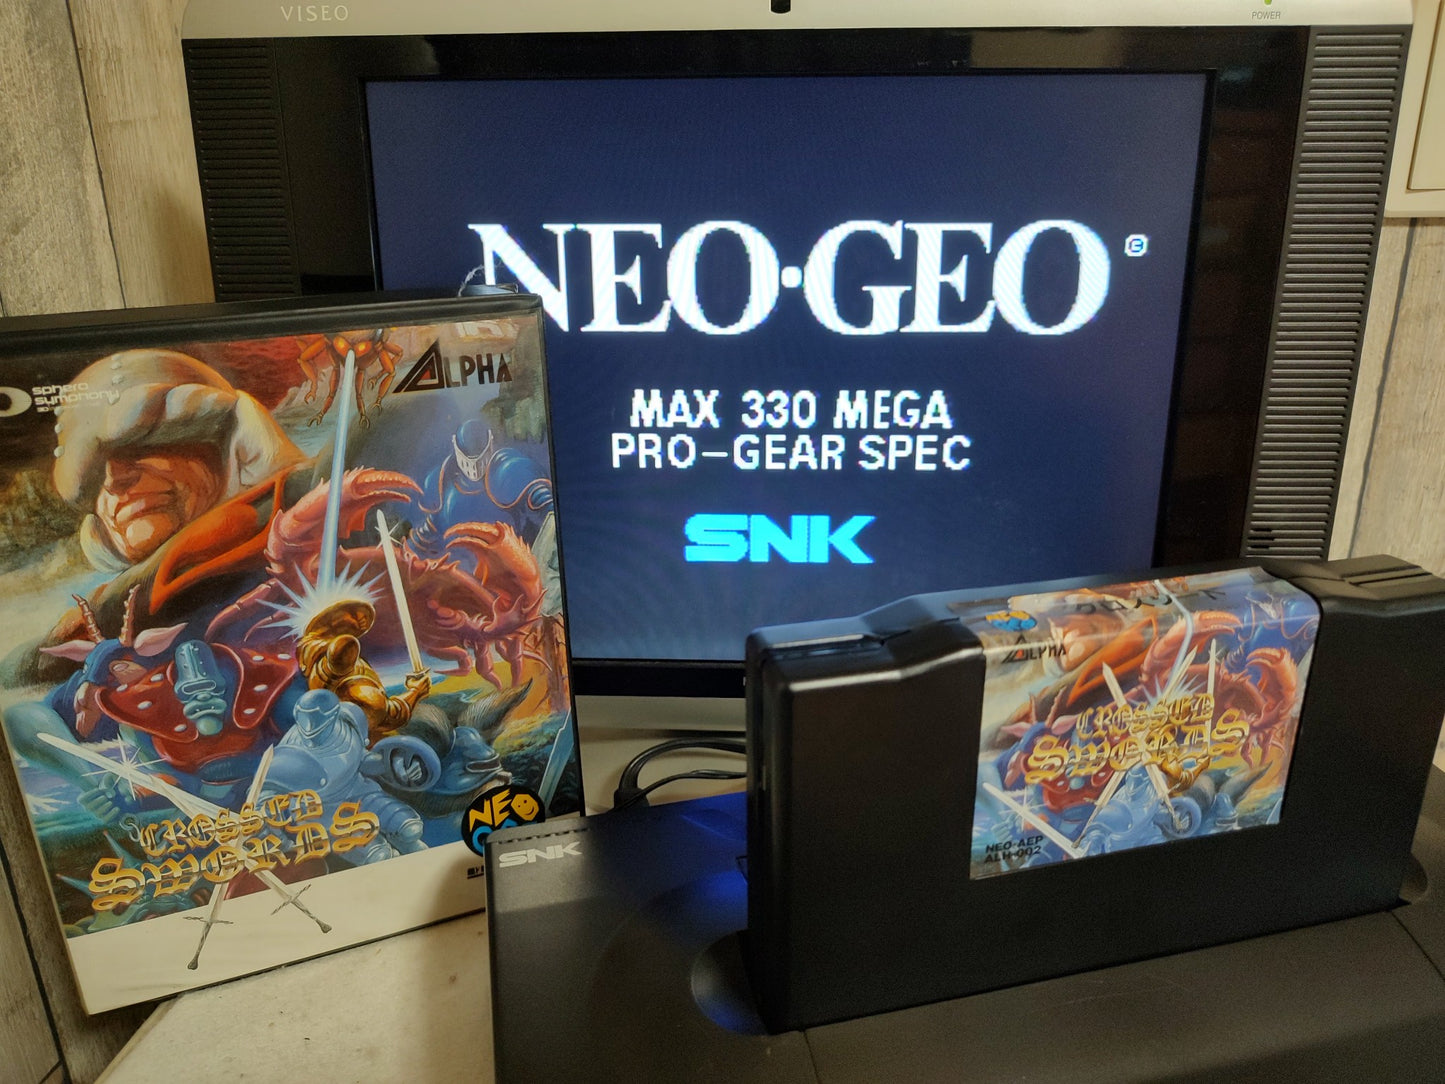 CROSS SWORD SNK NEO GEO AES Cartridge, Manual Boxed set tested-f0821